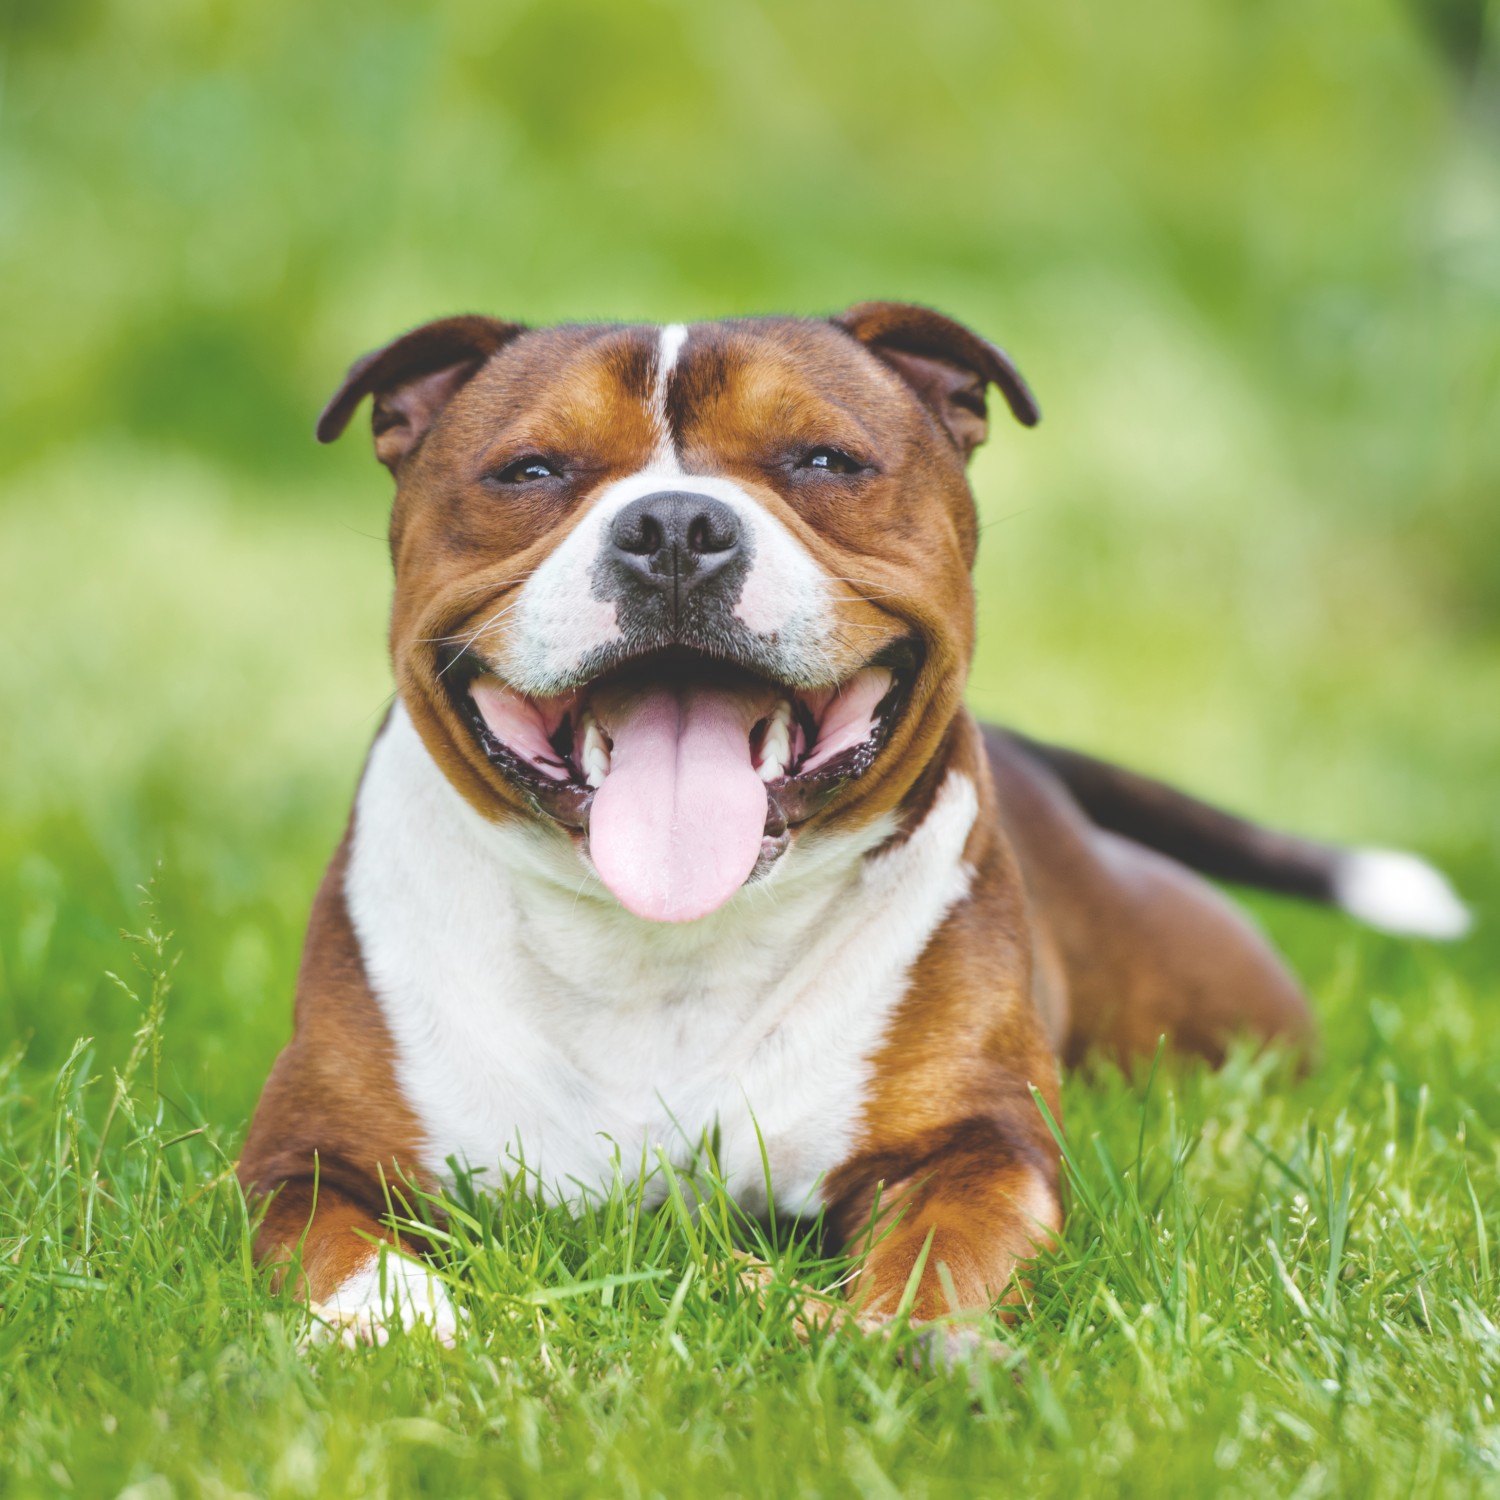 Smiling dog with tongue out laying in grass 